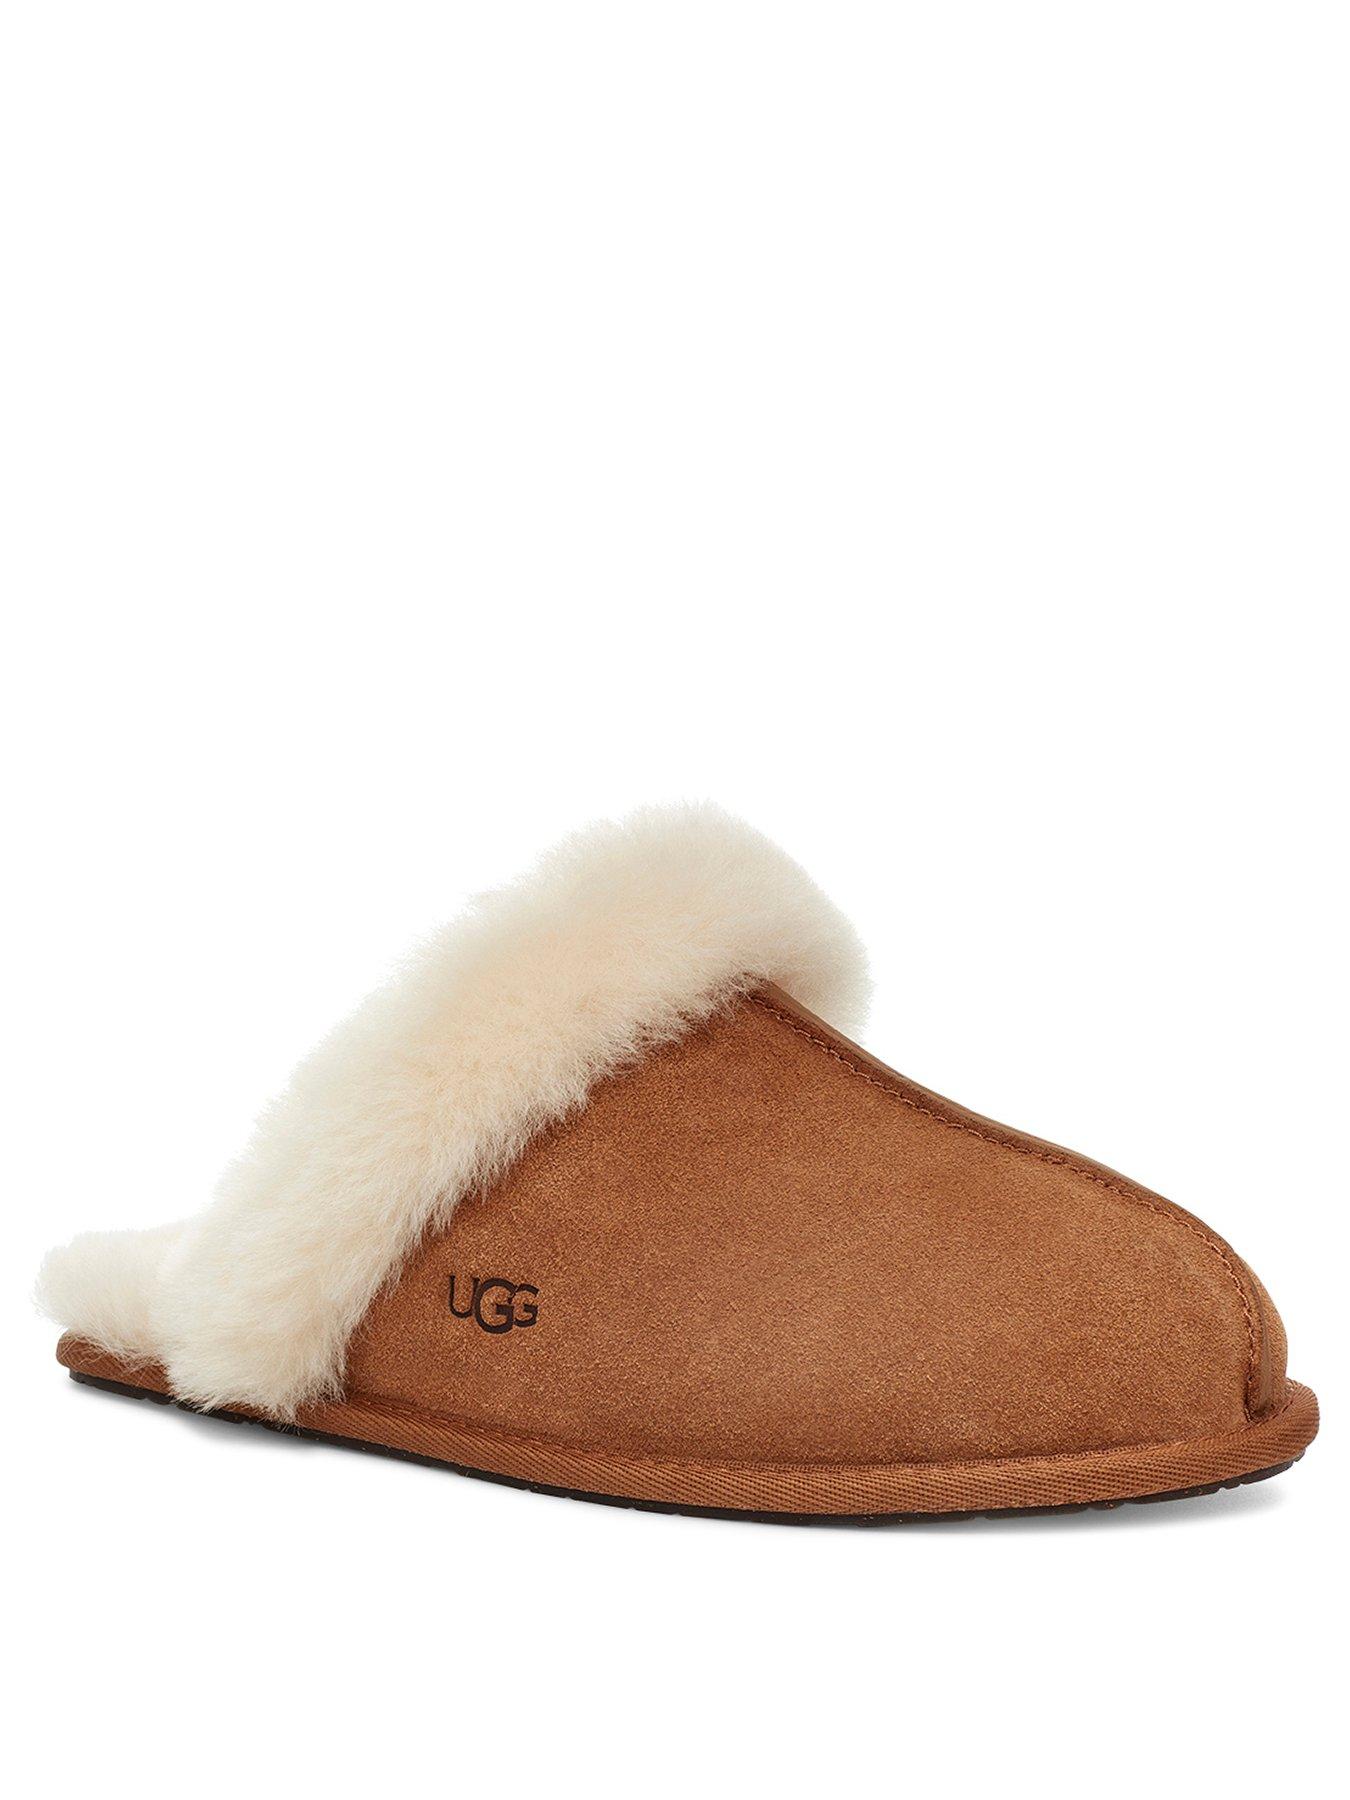 ugg slippers true to size